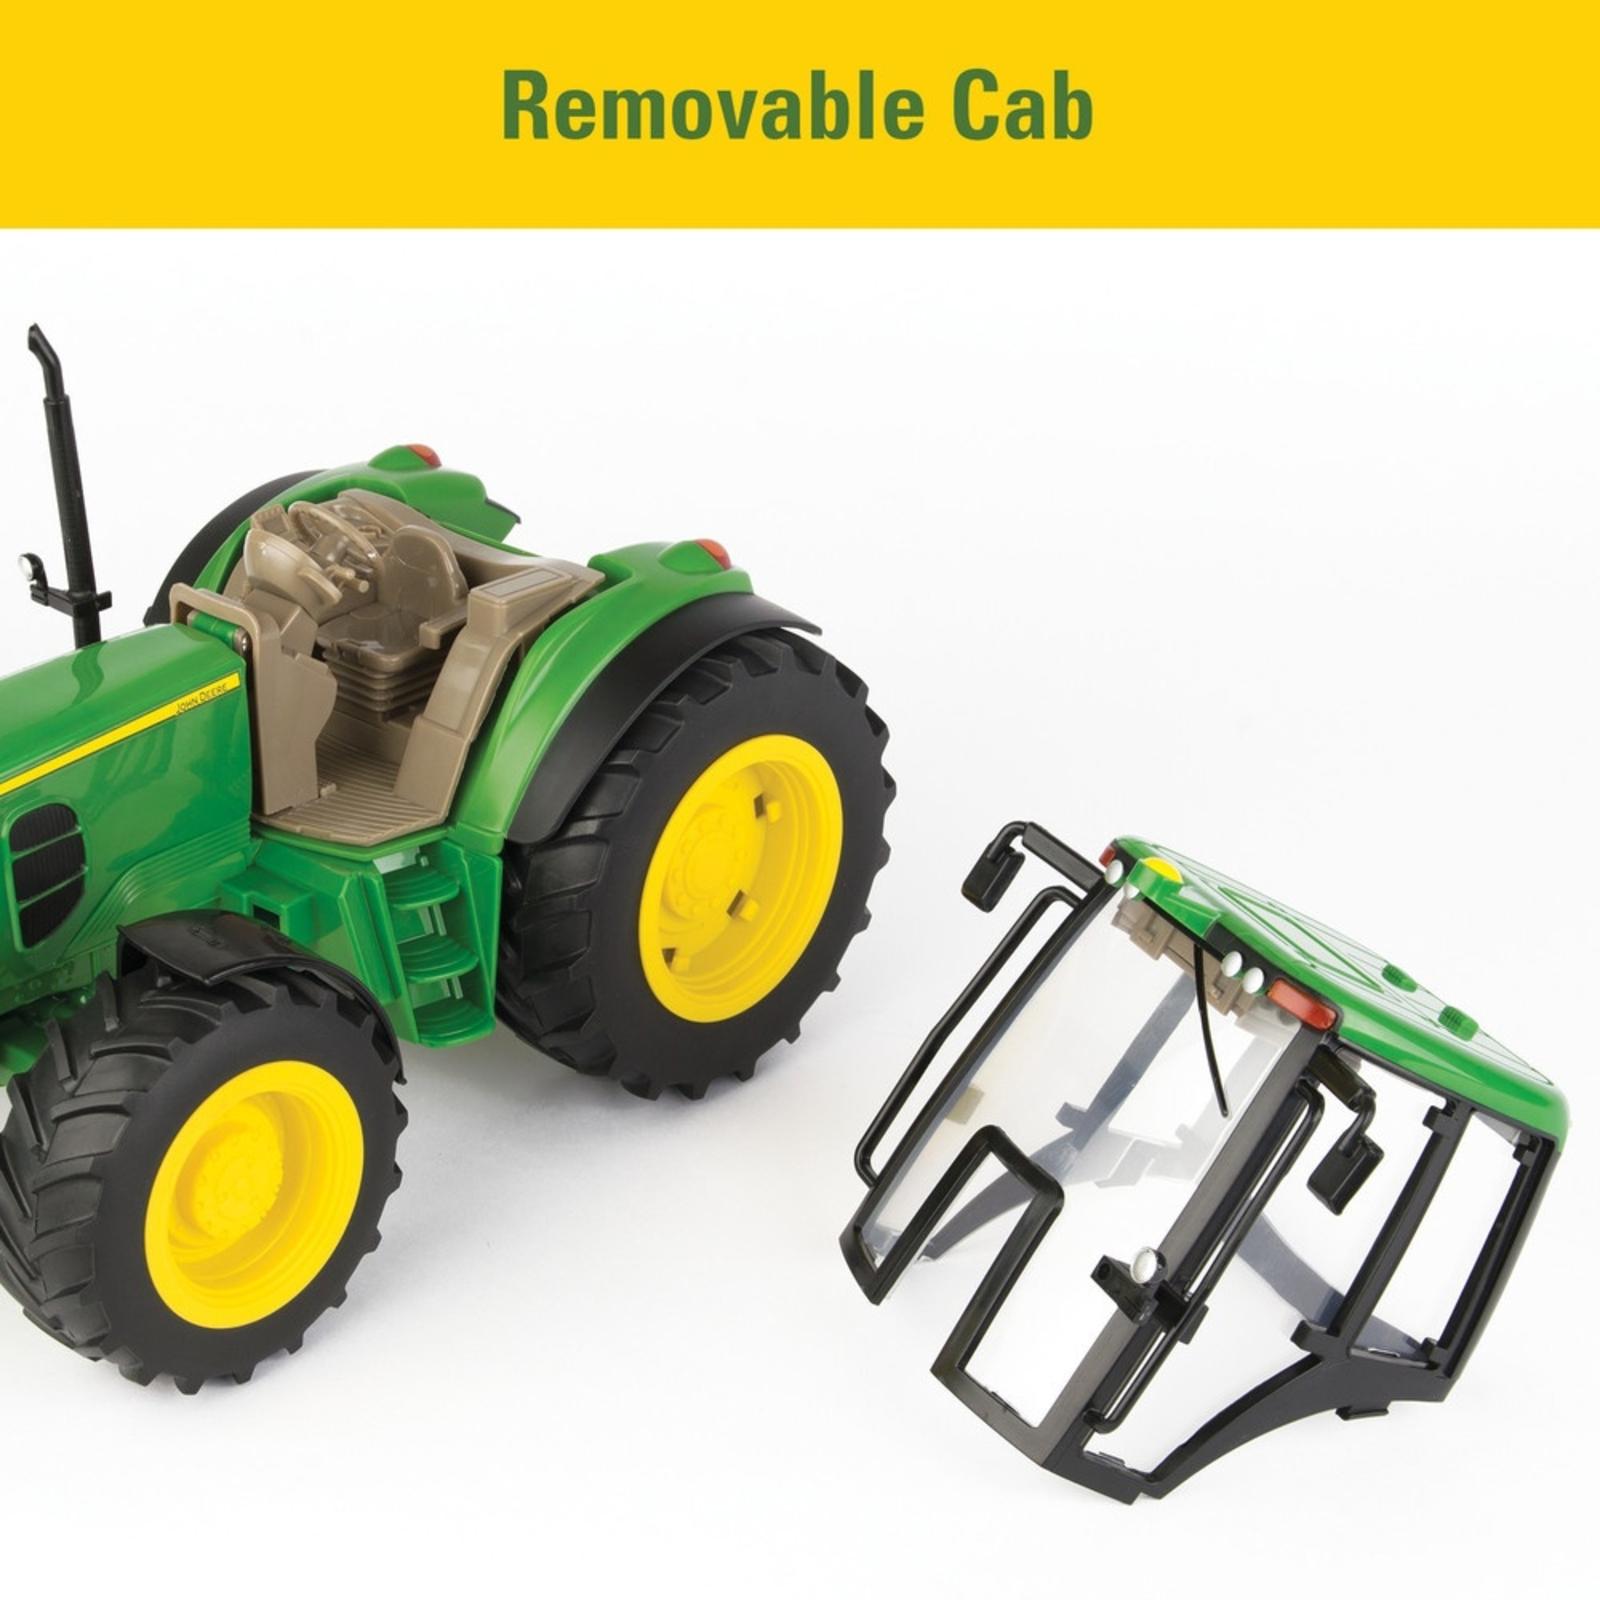 Removeable Cab